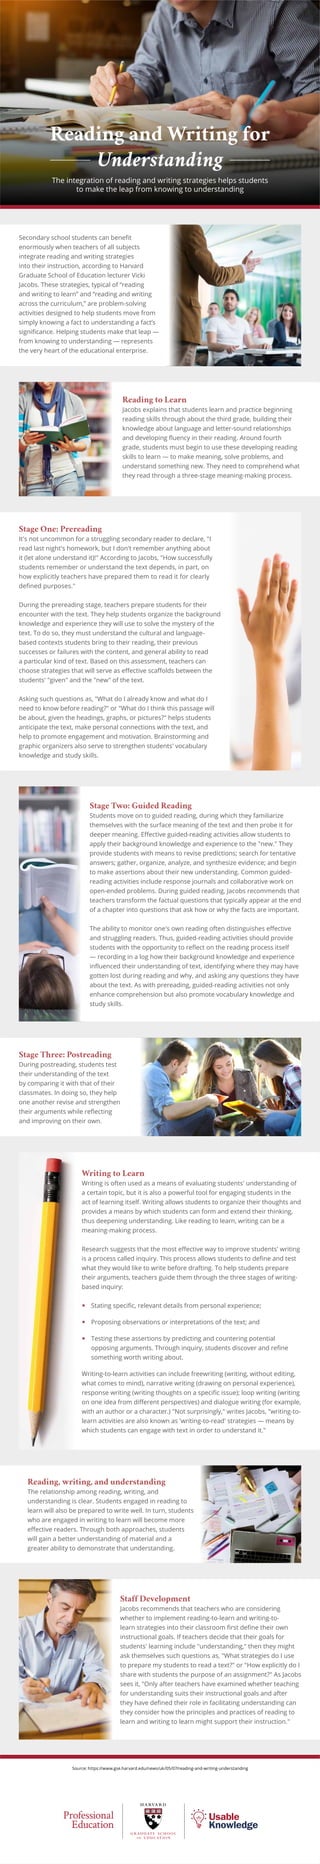 Source: https://www.gse.harvard.edu/news/uk/05/07/reading-and-writing-understanding
Reading and Writing for
Understanding
The integration of reading and writing strategies helps students
to make the leap from knowing to understanding
Reading, writing, and understanding
The relationship among reading, writing, and
understanding is clear. Students engaged in reading to
learn will also be prepared to write well. In turn, students
who are engaged in writing to learn will become more
effective readers. Through both approaches, students
will gain a better understanding of material and a
greater ability to demonstrate that understanding.
Stage Three: Postreading
During postreading, students test
their understanding of the text
by comparing it with that of their
classmates. In doing so, they help
one another revise and strengthen
their arguments while reflecting
and improving on their own.
Reading to Learn
Jacobs explains that students learn and practice beginning
reading skills through about the third grade, building their
knowledge about language and letter-sound relationships
and developing fluency in their reading. Around fourth
grade, students must begin to use these developing reading
skills to learn — to make meaning, solve problems, and
understand something new. They need to comprehend what
they read through a three-stage meaning-making process.
Secondary school students can benefit
enormously when teachers of all subjects
integrate reading and writing strategies
into their instruction, according to Harvard
Graduate School of Education lecturer Vicki
Jacobs. These strategies, typical of “reading
and writing to learn” and “reading and writing
across the curriculum,” are problem-solving
activities designed to help students move from
simply knowing a fact to understanding a fact’s
significance. Helping students make that leap —
from knowing to understanding — represents
the very heart of the educational enterprise.
Stage One: Prereading
It's not uncommon for a struggling secondary reader to declare, "I
read last night's homework, but I don't remember anything about
it (let alone understand it)!" According to Jacobs, "How successfully
students remember or understand the text depends, in part, on
how explicitly teachers have prepared them to read it for clearly
defined purposes."
During the prereading stage, teachers prepare students for their
encounter with the text. They help students organize the background
knowledge and experience they will use to solve the mystery of the
text. To do so, they must understand the cultural and language-
based contexts students bring to their reading, their previous
successes or failures with the content, and general ability to read
a particular kind of text. Based on this assessment, teachers can
choose strategies that will serve as effective scaffolds between the
students' "given" and the "new" of the text.
Asking such questions as, "What do I already know and what do I
need to know before reading?" or "What do I think this passage will
be about, given the headings, graphs, or pictures?" helps students
anticipate the text, make personal connections with the text, and
help to promote engagement and motivation. Brainstorming and
graphic organizers also serve to strengthen students' vocabulary
knowledge and study skills.
Stage Two: Guided Reading
Students move on to guided reading, during which they familiarize
themselves with the surface meaning of the text and then probe it for
deeper meaning. Effective guided-reading activities allow students to
apply their background knowledge and experience to the "new." They
provide students with means to revise predictions; search for tentative
answers; gather, organize, analyze, and synthesize evidence; and begin
to make assertions about their new understanding. Common guided-
reading activities include response journals and collaborative work on
open-ended problems. During guided reading, Jacobs recommends that
teachers transform the factual questions that typically appear at the end
of a chapter into questions that ask how or why the facts are important.
The ability to monitor one's own reading often distinguishes effective
and struggling readers. Thus, guided-reading activities should provide
students with the opportunity to reflect on the reading process itself
— recording in a log how their background knowledge and experience
influenced their understanding of text, identifying where they may have
gotten lost during reading and why, and asking any questions they have
about the text. As with prereading, guided-reading activities not only
enhance comprehension but also promote vocabulary knowledge and
study skills.
Staff Development
Jacobs recommends that teachers who are considering
whether to implement reading-to-learn and writing-to-
learn strategies into their classroom first define their own
instructional goals. If teachers decide that their goals for
students' learning include "understanding," then they might
ask themselves such questions as, "What strategies do I use
to prepare my students to read a text?" or "How explicitly do I
share with students the purpose of an assignment?" As Jacobs
sees it, "Only after teachers have examined whether teaching
for understanding suits their instructional goals and after
they have defined their role in facilitating understanding can
they consider how the principles and practices of reading to
learn and writing to learn might support their instruction."
Writing to Learn
Writing is often used as a means of evaluating students' understanding of
a certain topic, but it is also a powerful tool for engaging students in the
act of learning itself. Writing allows students to organize their thoughts and
provides a means by which students can form and extend their thinking,
thus deepening understanding. Like reading to learn, writing can be a
meaning-making process.
Research suggests that the most effective way to improve students' writing
is a process called inquiry. This process allows students to define and test
what they would like to write before drafting. To help students prepare
their arguments, teachers guide them through the three stages of writing-
based inquiry:
•	 Stating specific, relevant details from personal experience;
•	 Proposing observations or interpretations of the text; and
•	 Testing these assertions by predicting and countering potential
opposing arguments. Through inquiry, students discover and refine
something worth writing about.
Writing-to-learn activities can include freewriting (writing, without editing,
what comes to mind), narrative writing (drawing on personal experience),
response writing (writing thoughts on a specific issue); loop writing (writing
on one idea from different perspectives) and dialogue writing (for example,
with an author or a character.) "Not surprisingly," writes Jacobs, "writing-to-
learn activities are also known as 'writing-to-read' strategies — means by
which students can engage with text in order to understand it."
 